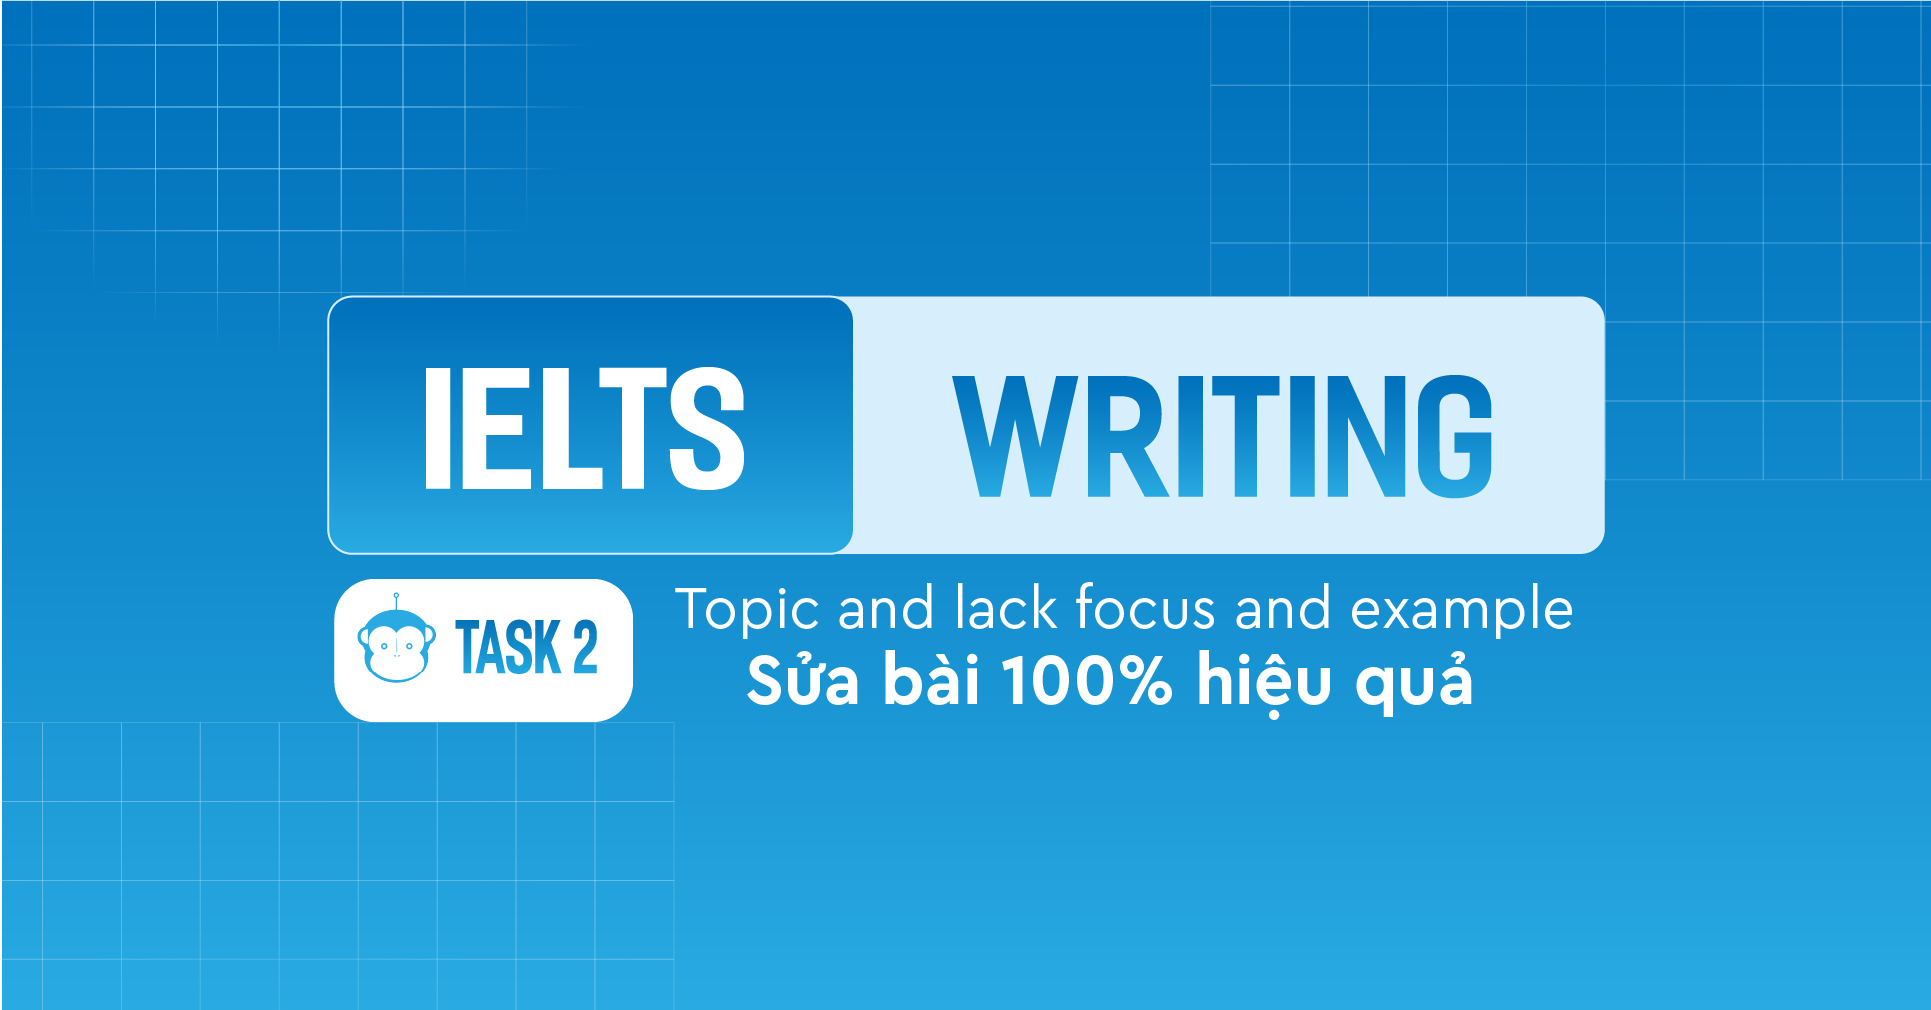 IELTS Writing Task 2 - Off-Topic And Lacks Focus And Examples